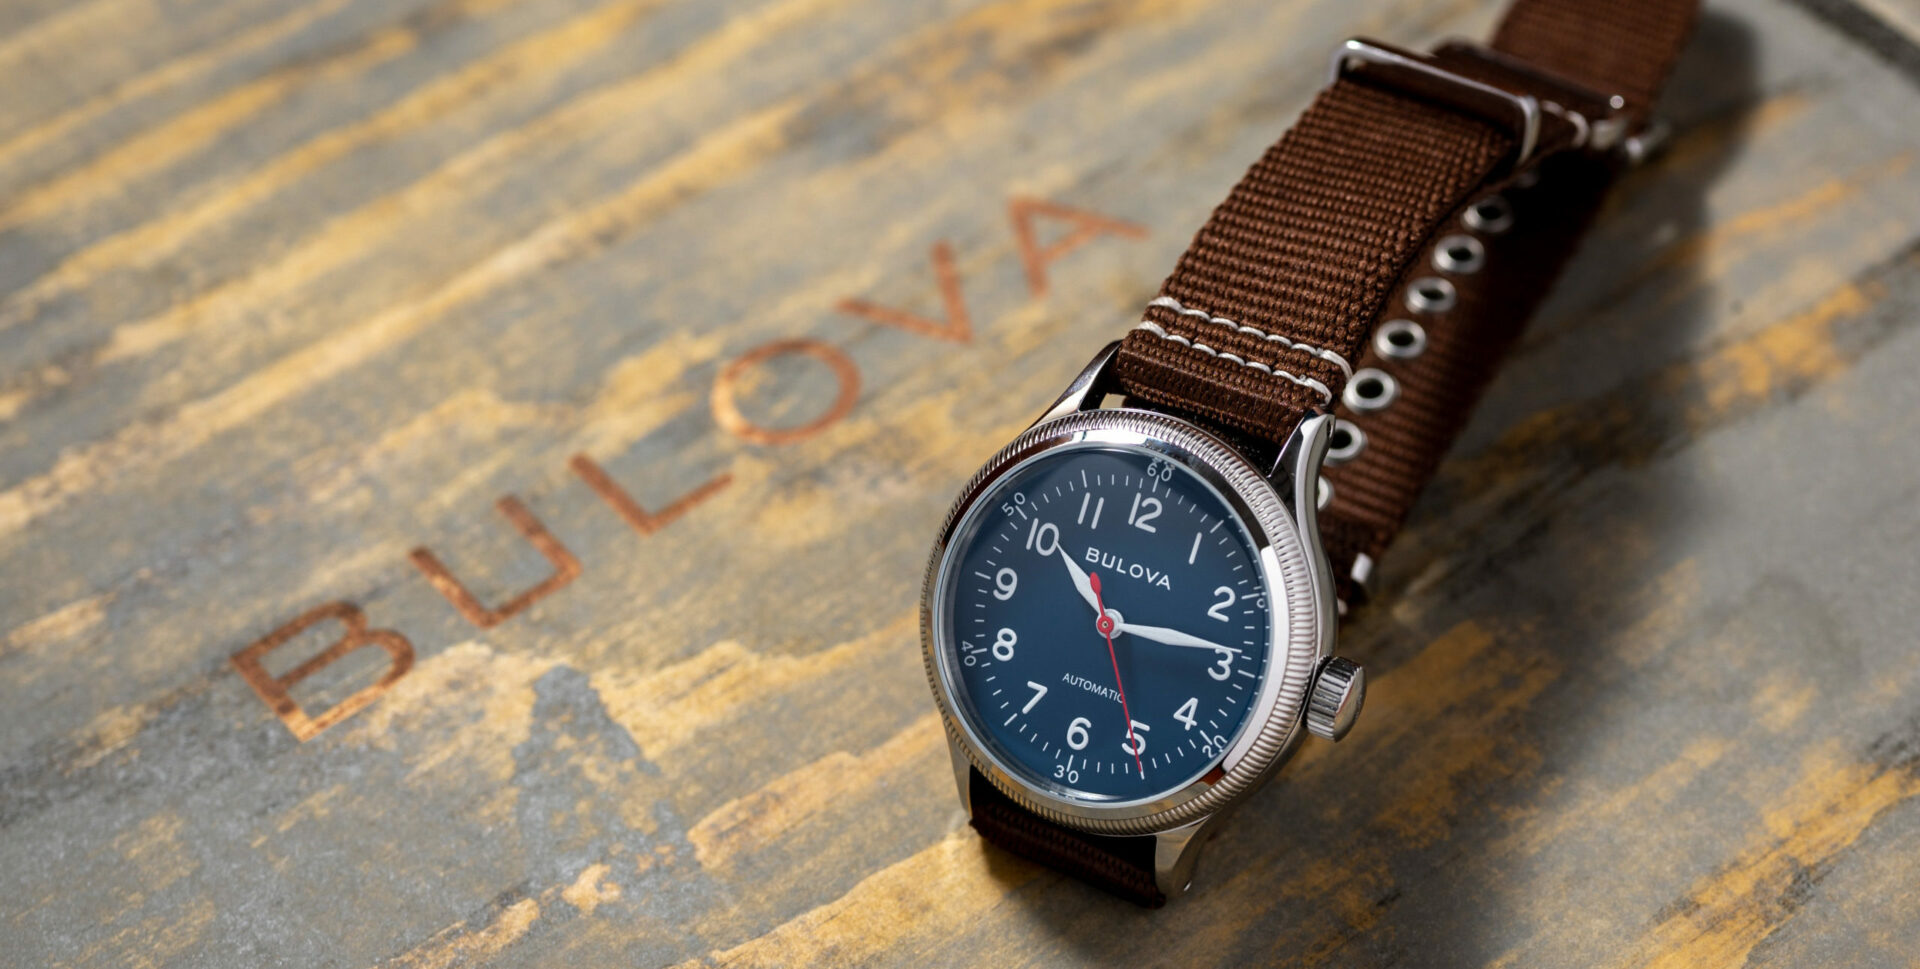 HANDS-ON: The Bulova Classic HACK Military is a handsome field watch for under $500 USD